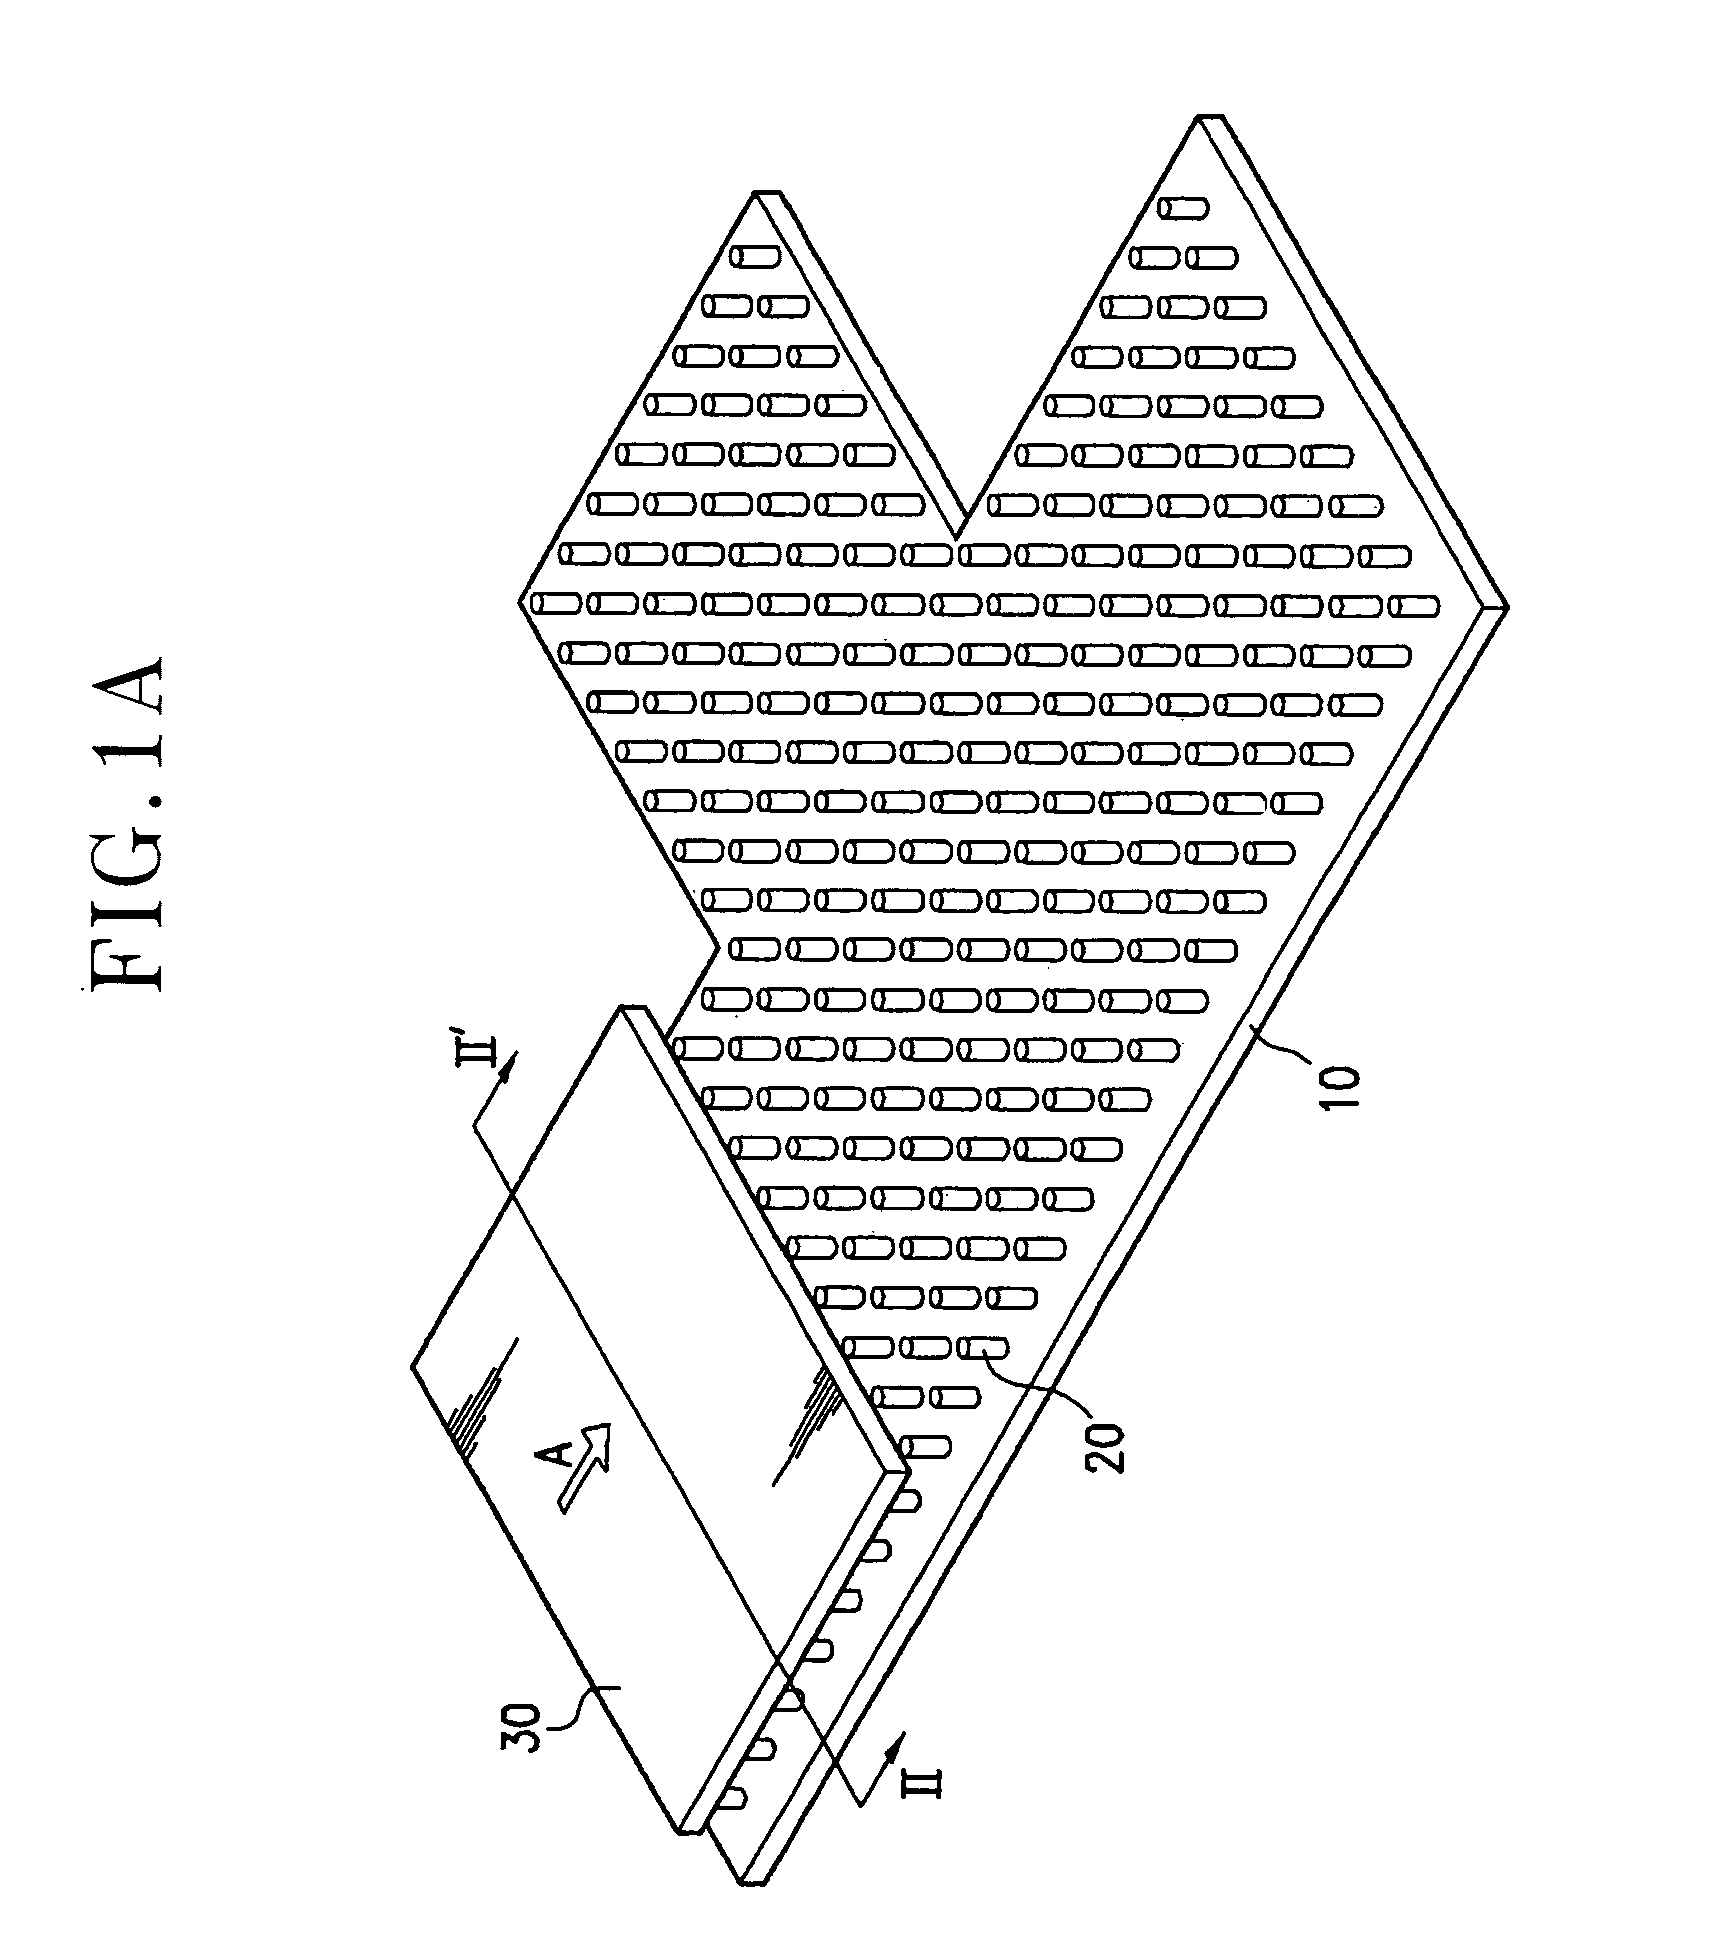 Inline transfer system and method